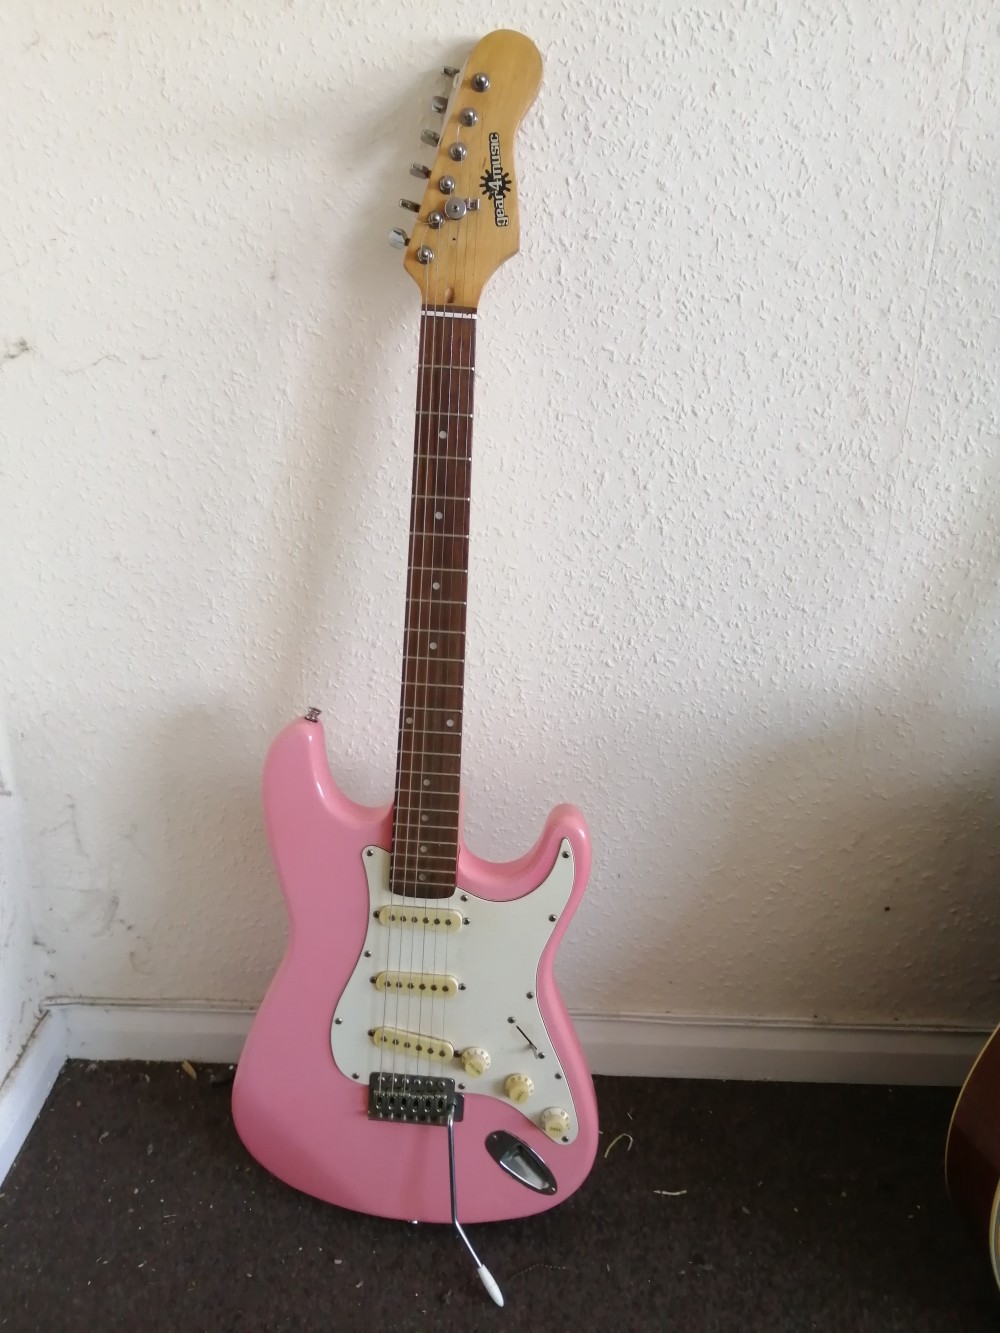 A Gear 4 Music Strat-style electric guitar